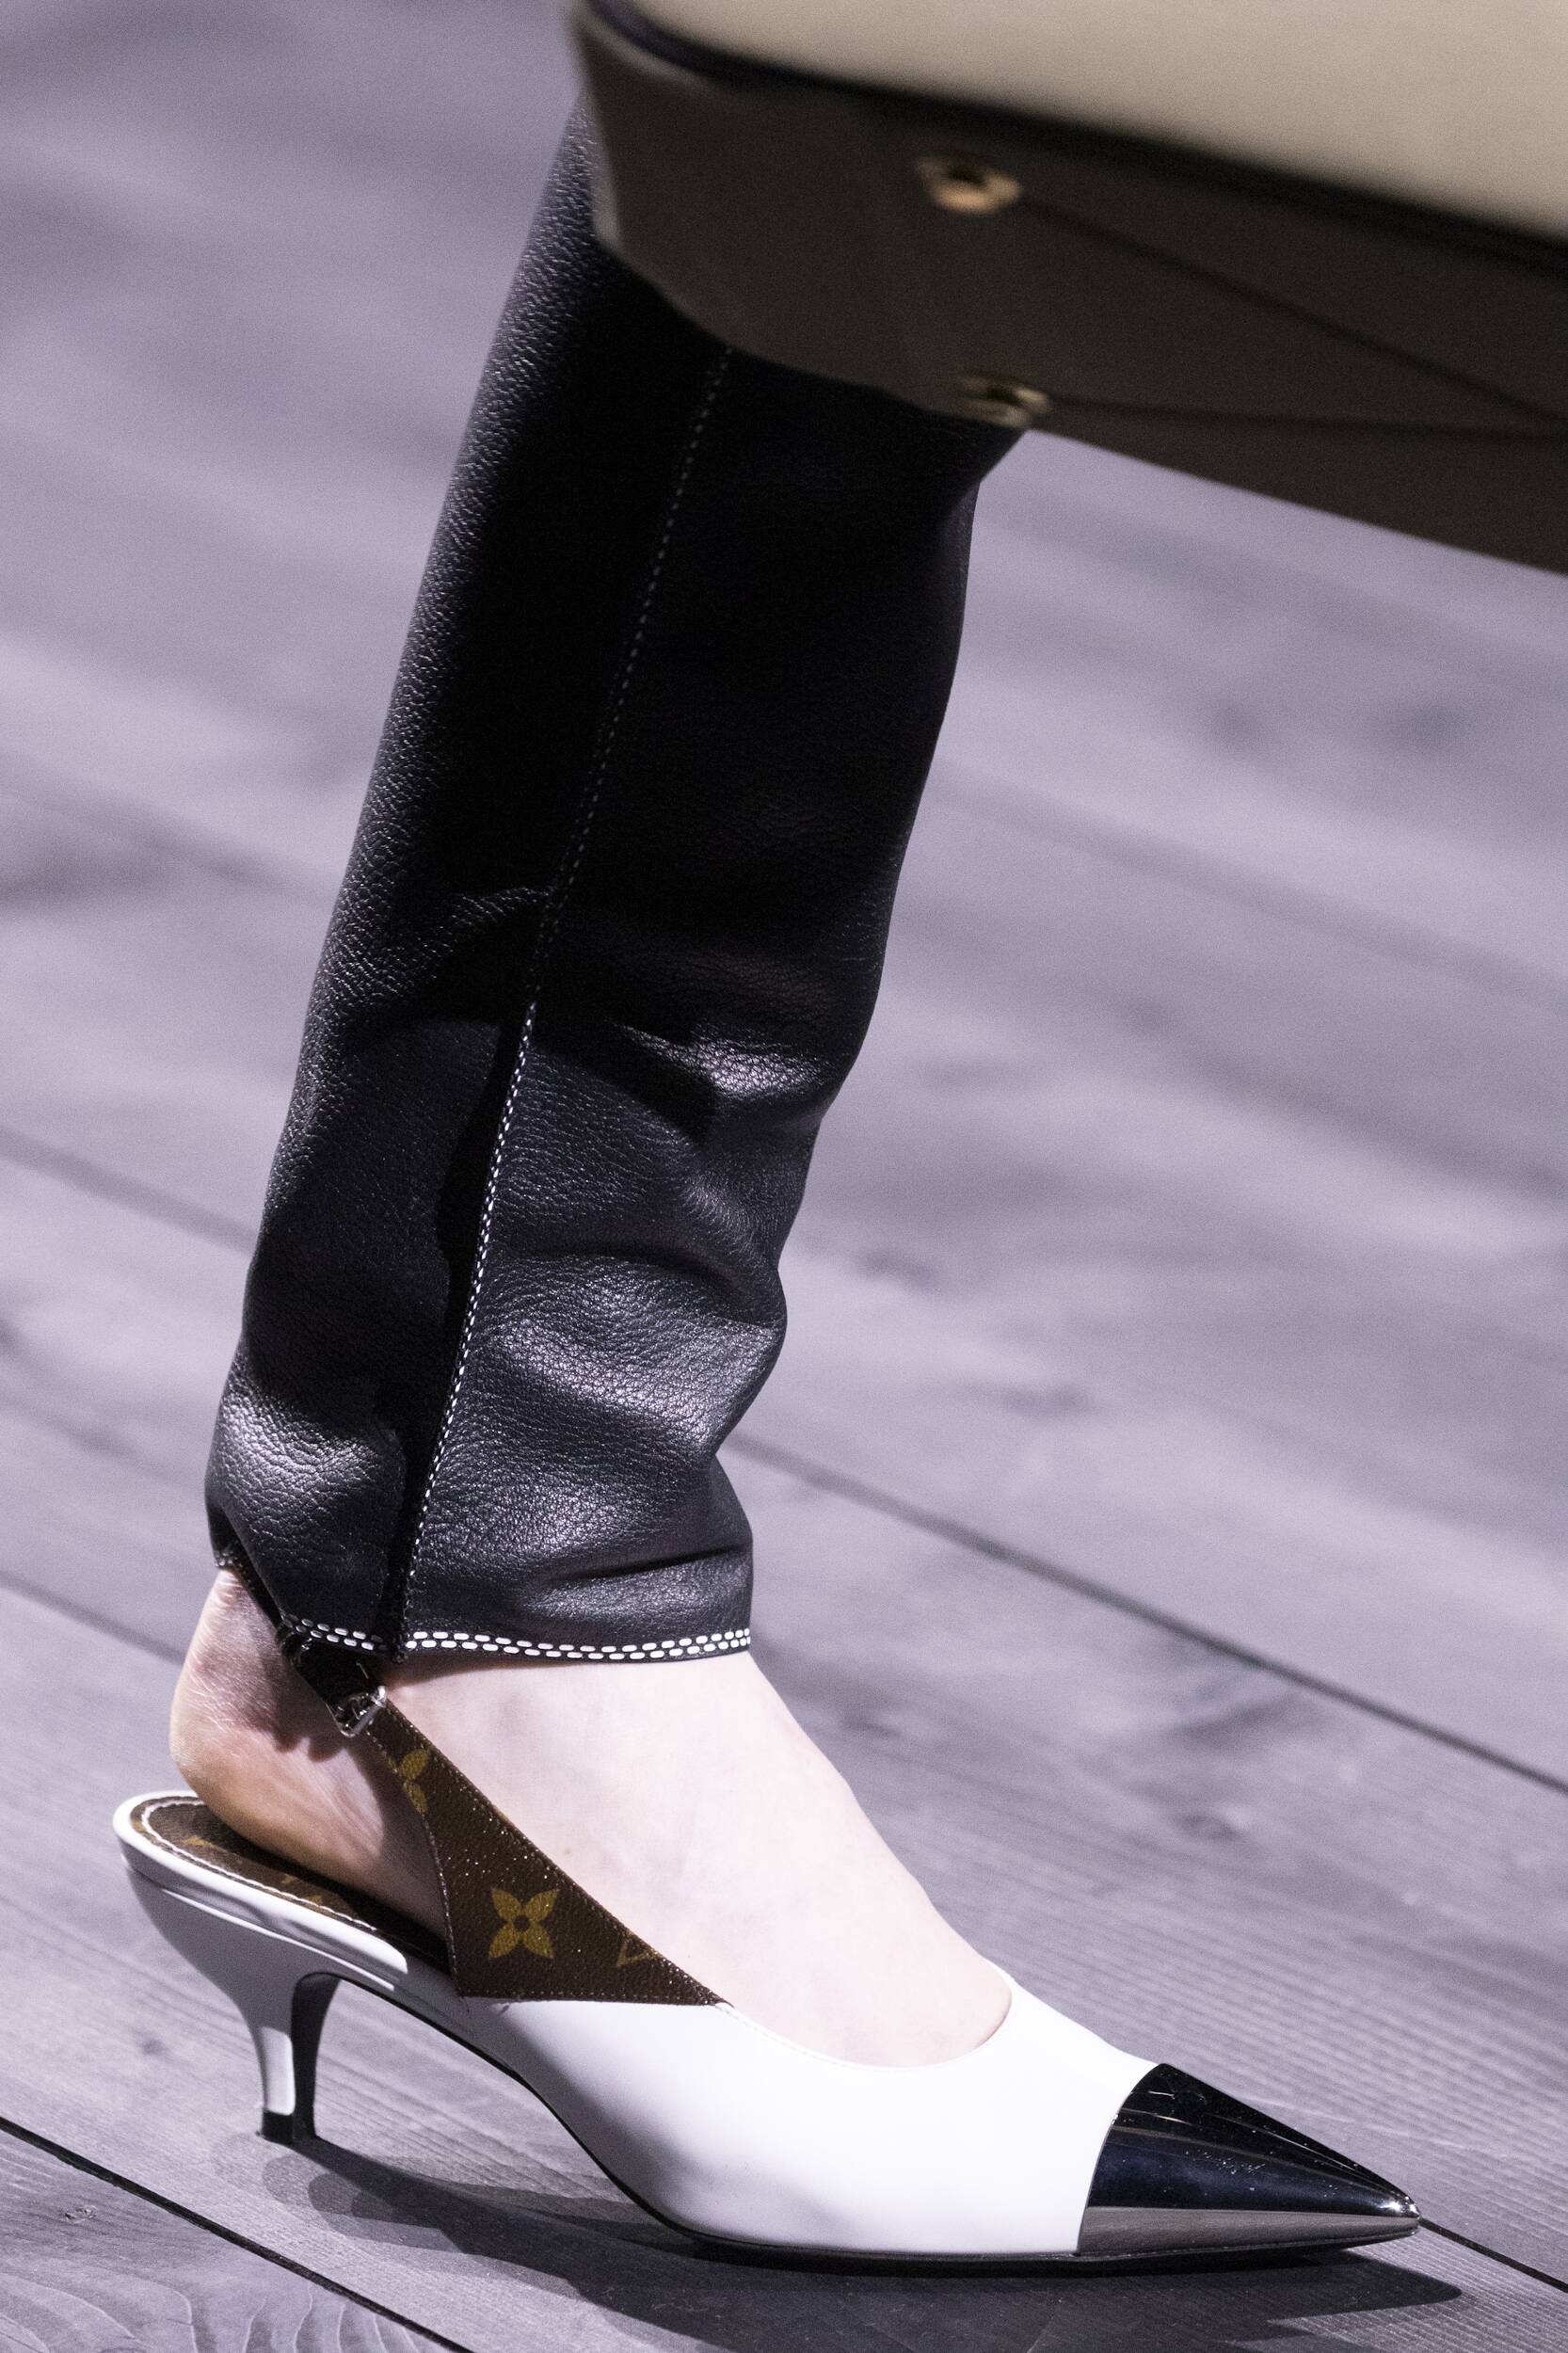 LOUIS VUITTON FALL WINTER 2020 WOMEN’S COLLECTION DETAILS | The Skinny Beep